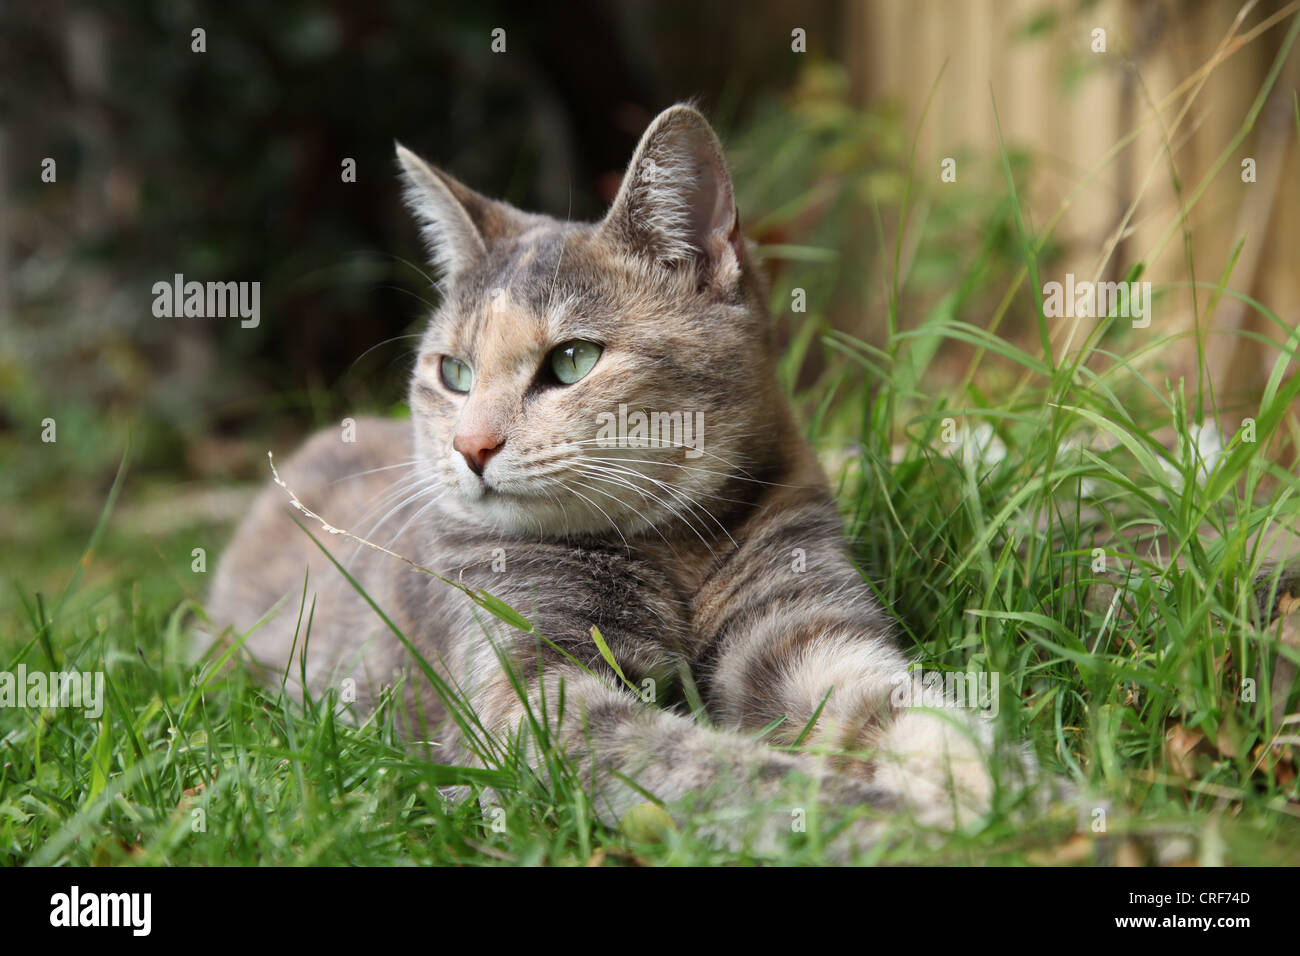 Tortoiseshell Tabby Cat High Resolution Stock Photography And Images Alamy,8th Anniversary Card